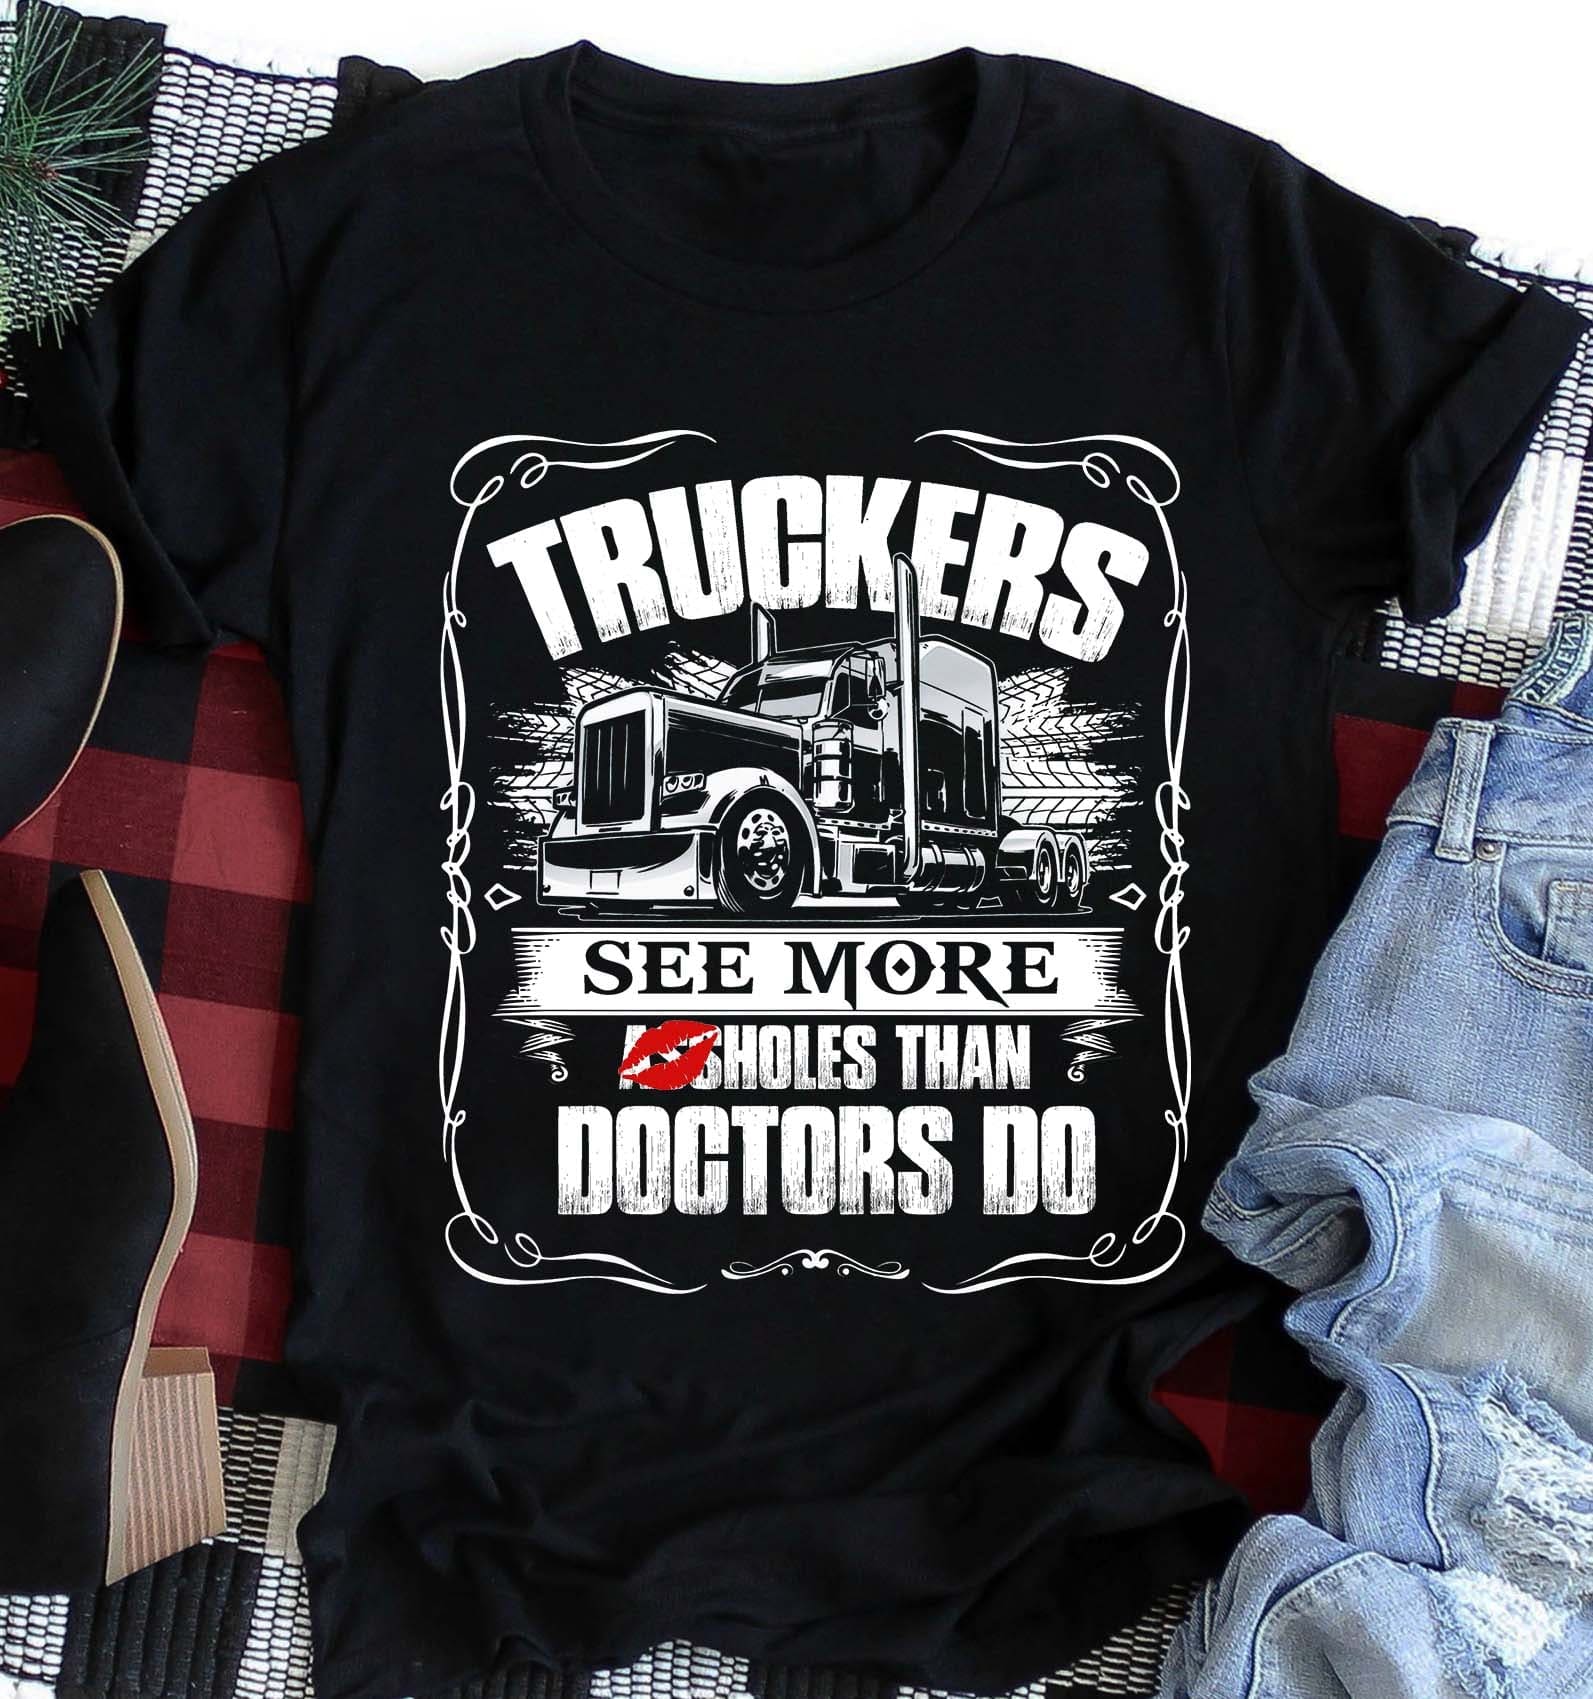 Truckers see more asshole than doctors do - Gift for trucker, grumpy trucker T-shirt